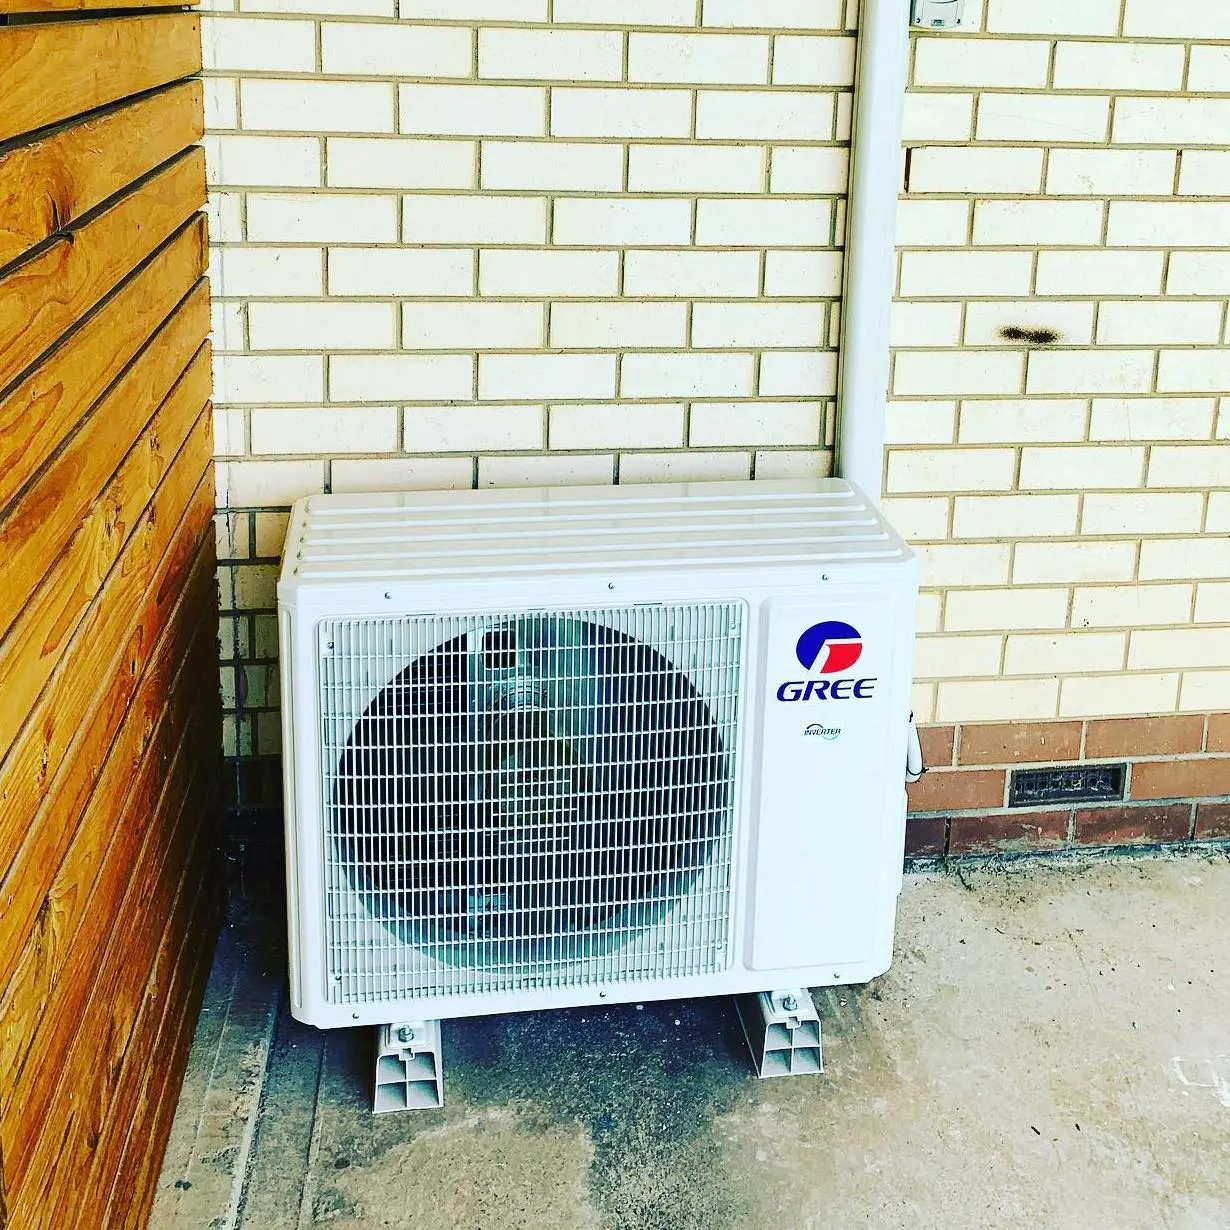 A new 7kw Gree air conditioner that we installed in Port Noarlunga South at the back of a property.